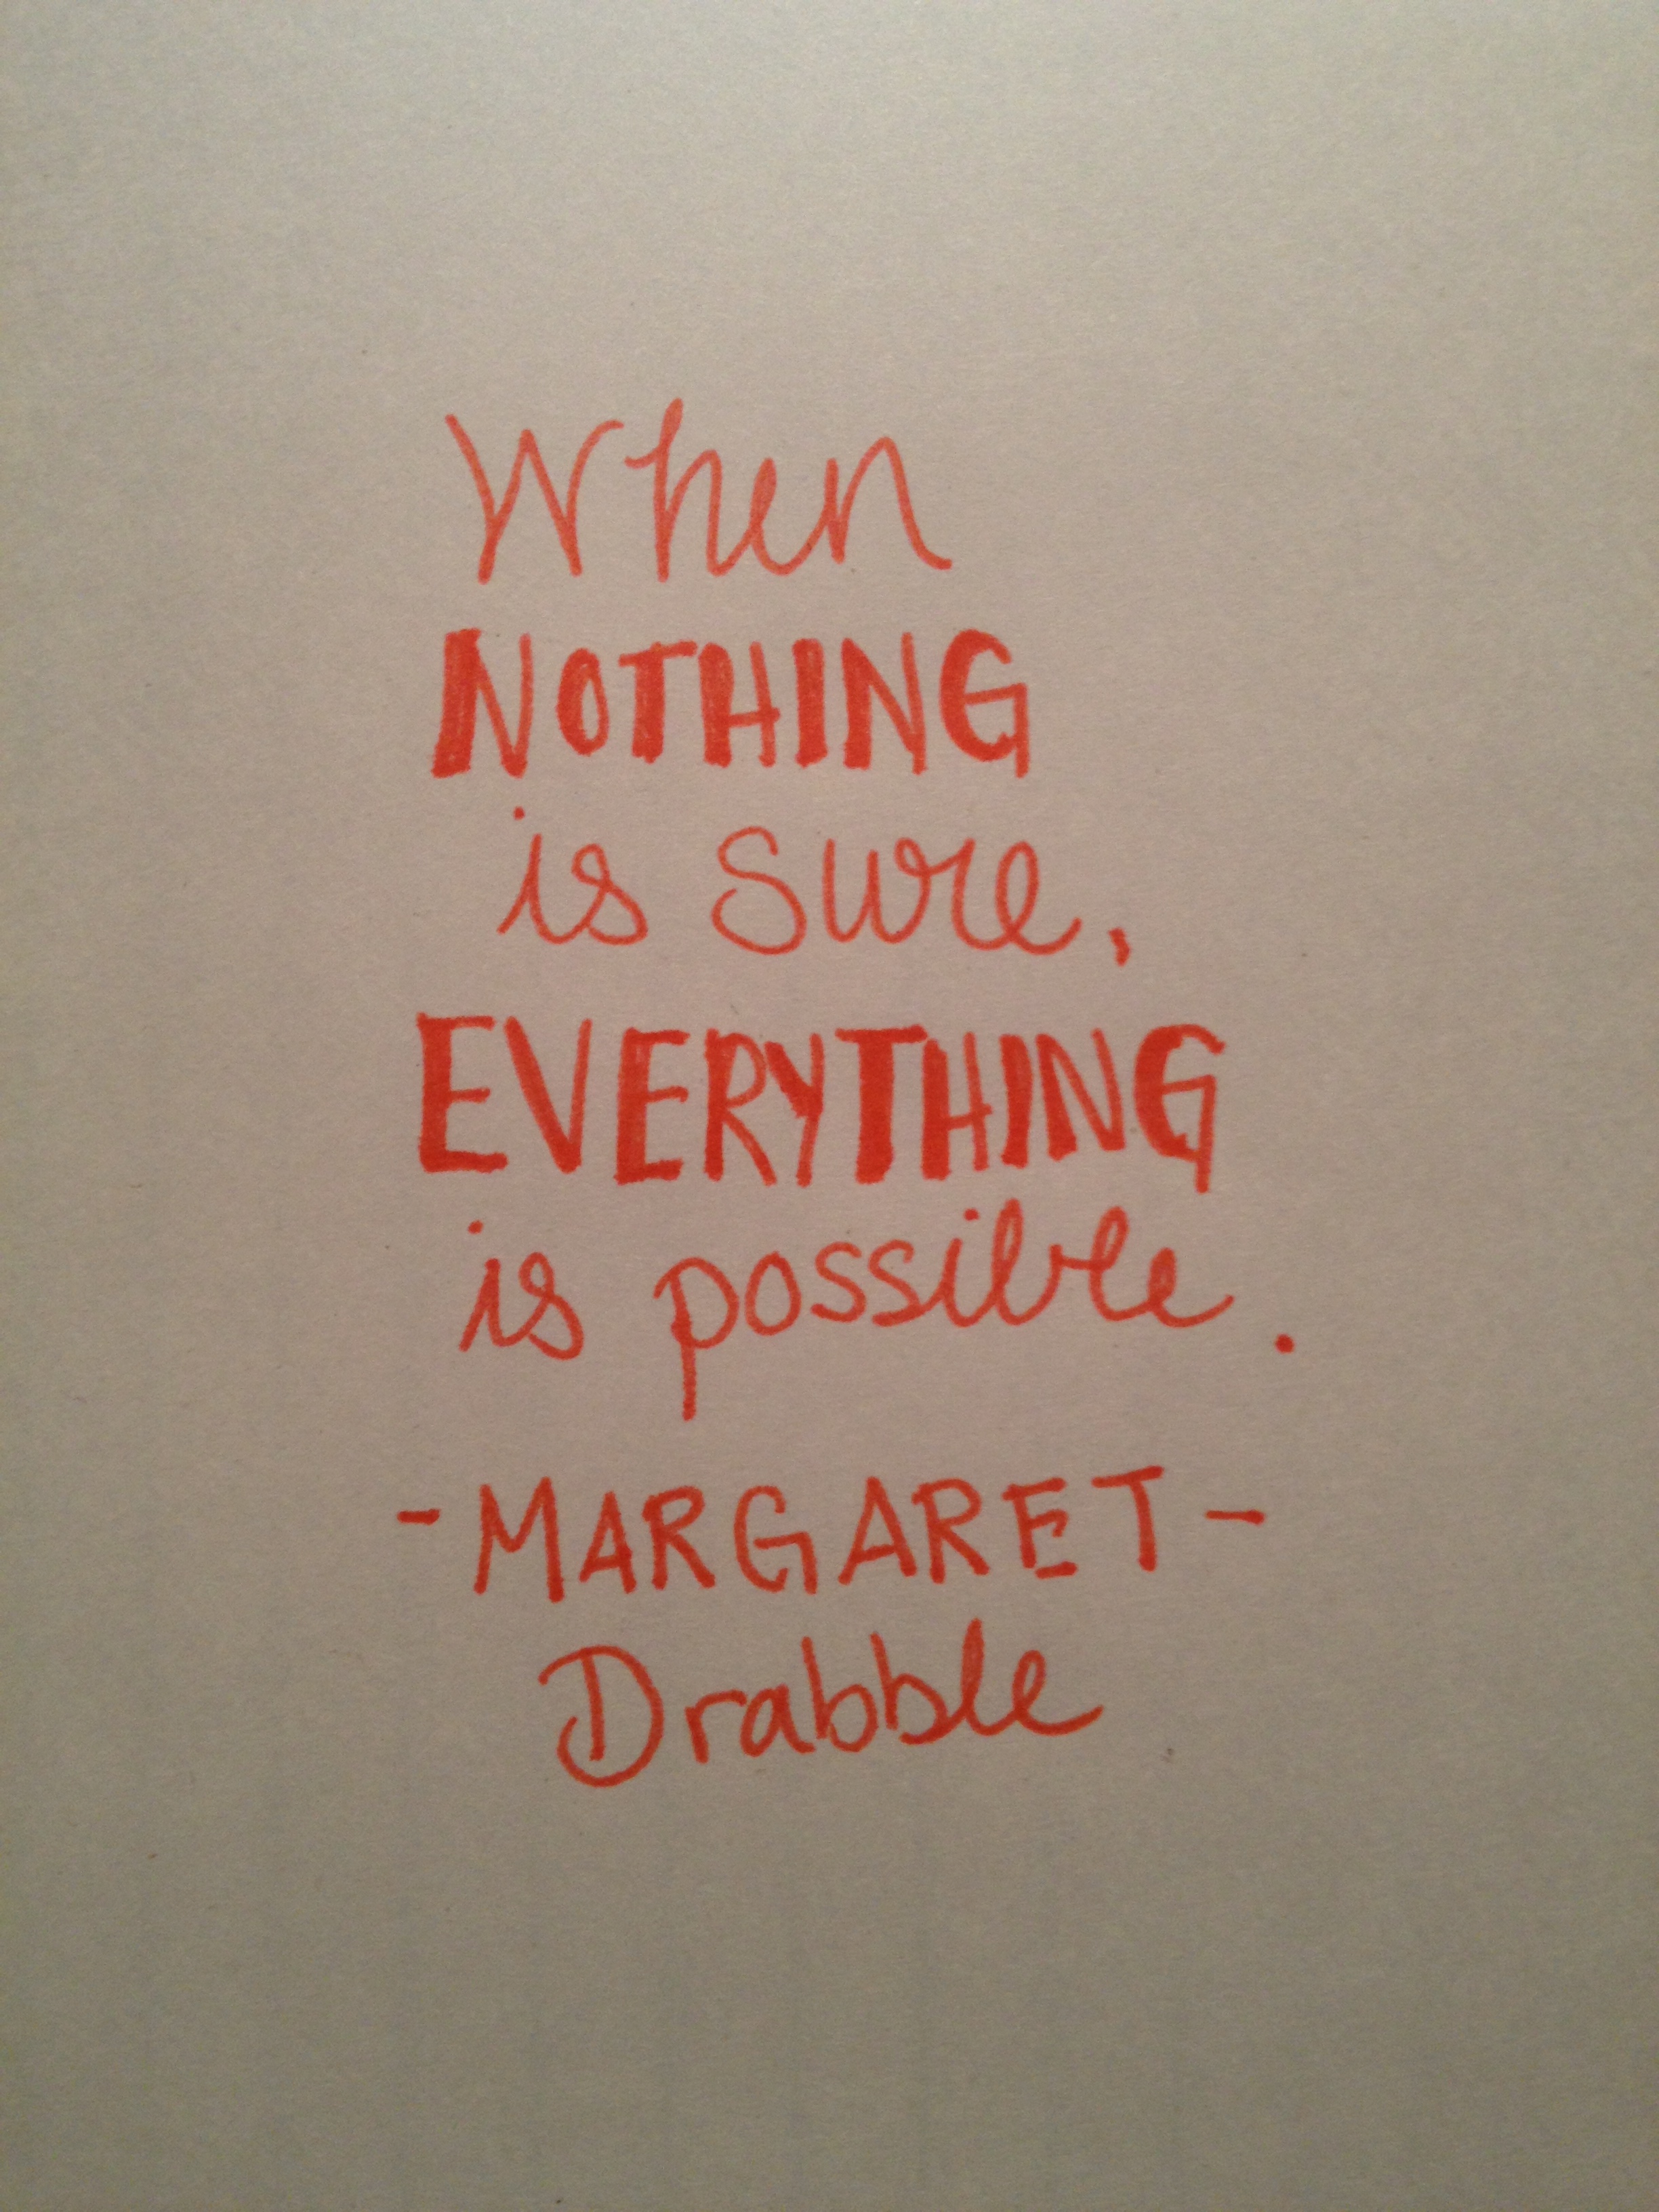 when nothing is sure, everything is possible – ideas in turquoise